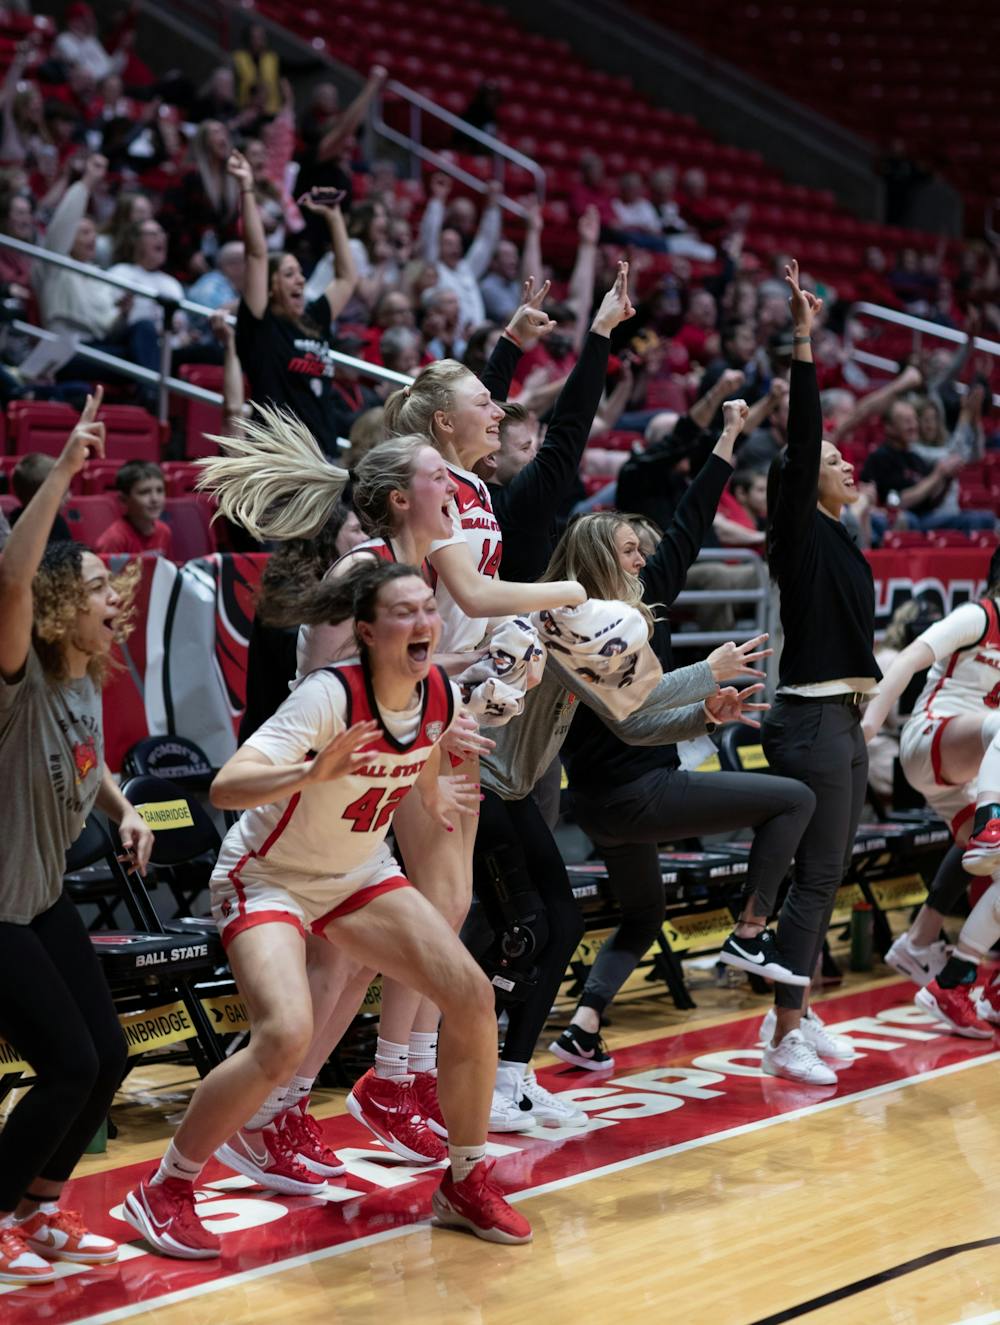 Members of the Ball State Women's Basketball team celebrate after senior Blake Smith hits a three-pointer in their game against Eastern Michigan University Mar. 5 at Worthen Arena. The Cardinals rotated their entire bench into the line up on Senior Night. Eli Houser, DN